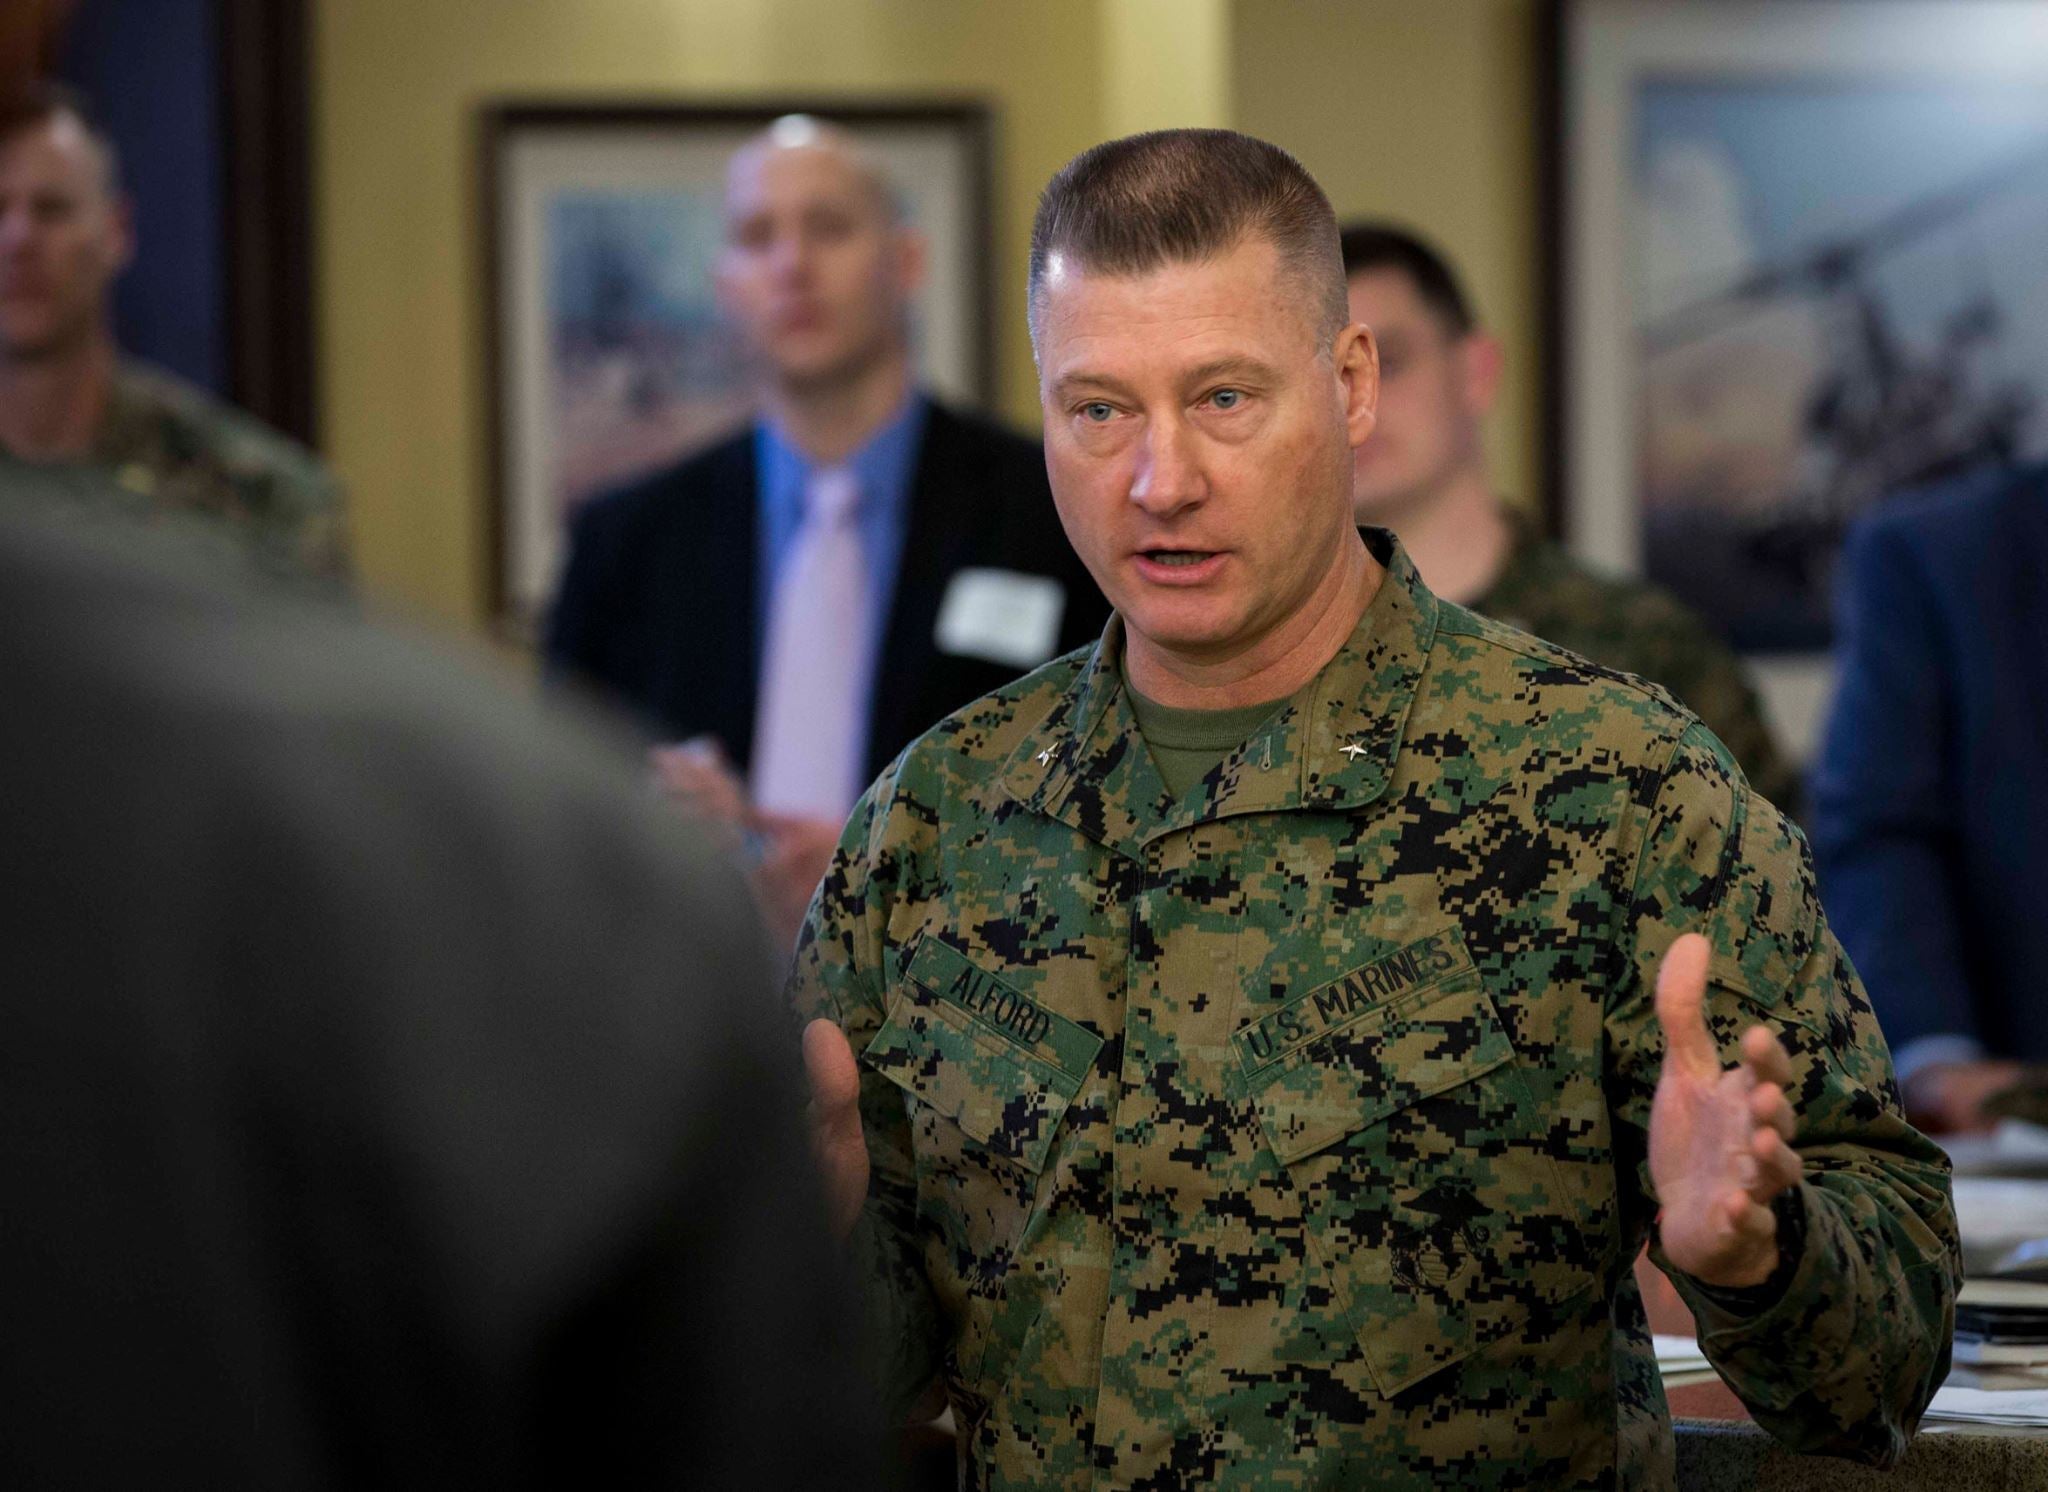 Brig. Gen. J.D. Alford, Commanding General, Marine Corps Warfighting Laboratory/Futures Directorate, talks with Science Fiction Writer's Workshop participants Feb. 4. (Photo by Kyle Olson, Marine Corps Warfighting Laboratory)